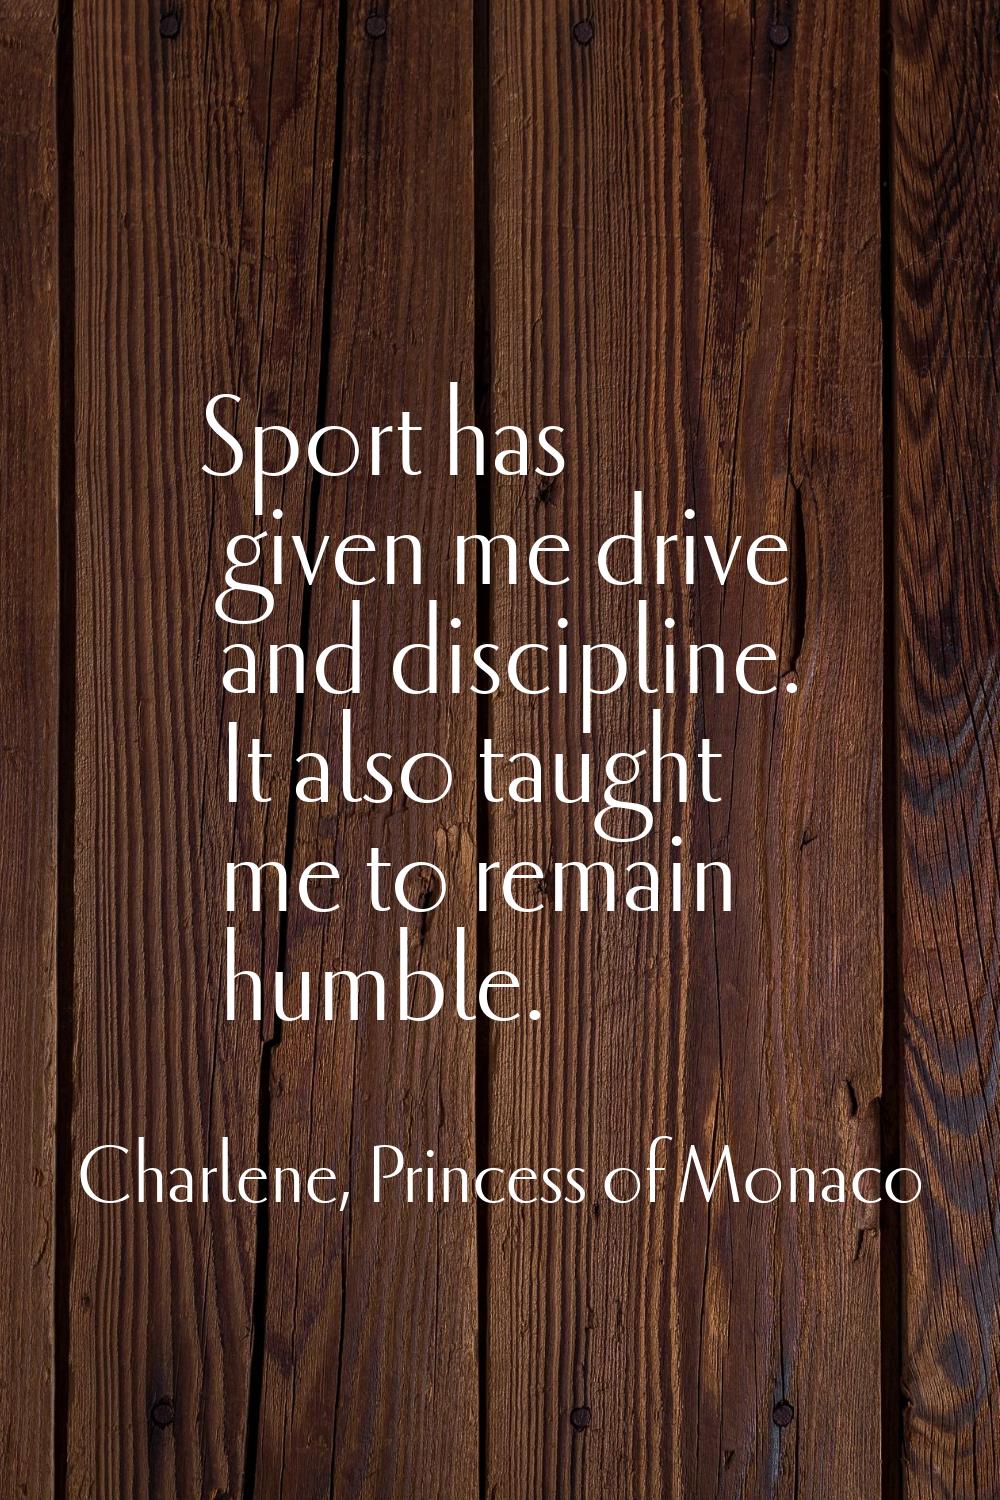 Sport has given me drive and discipline. It also taught me to remain humble.